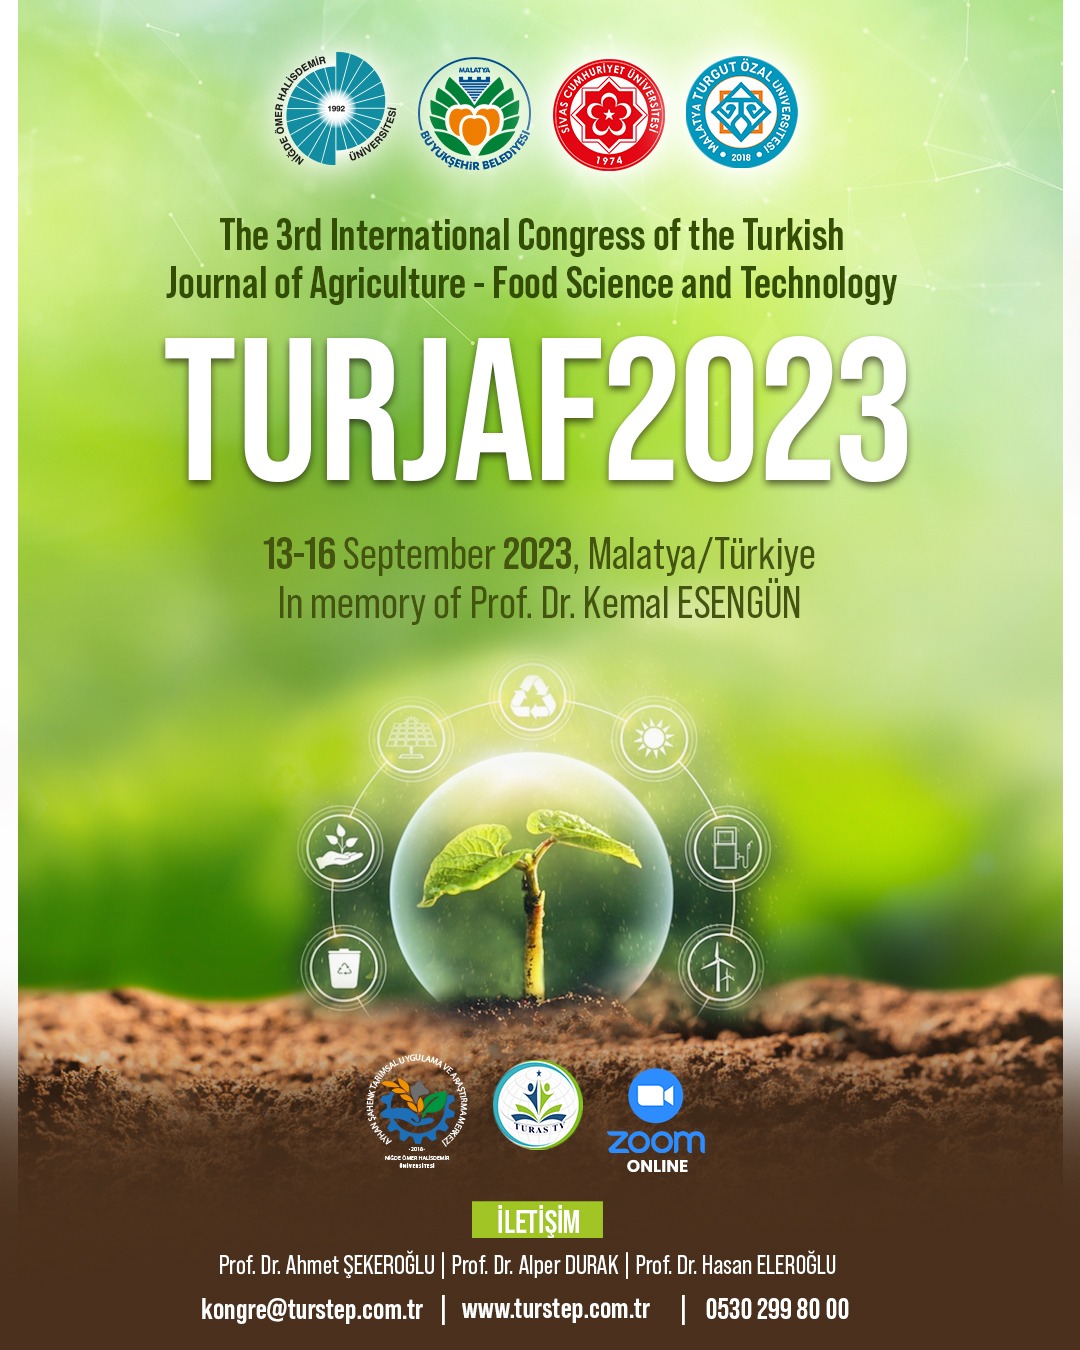 					View 3rd International Congress of the Turkish Journal of Agriculture - Food Science and Technology, Malatya, Türkiye 
				